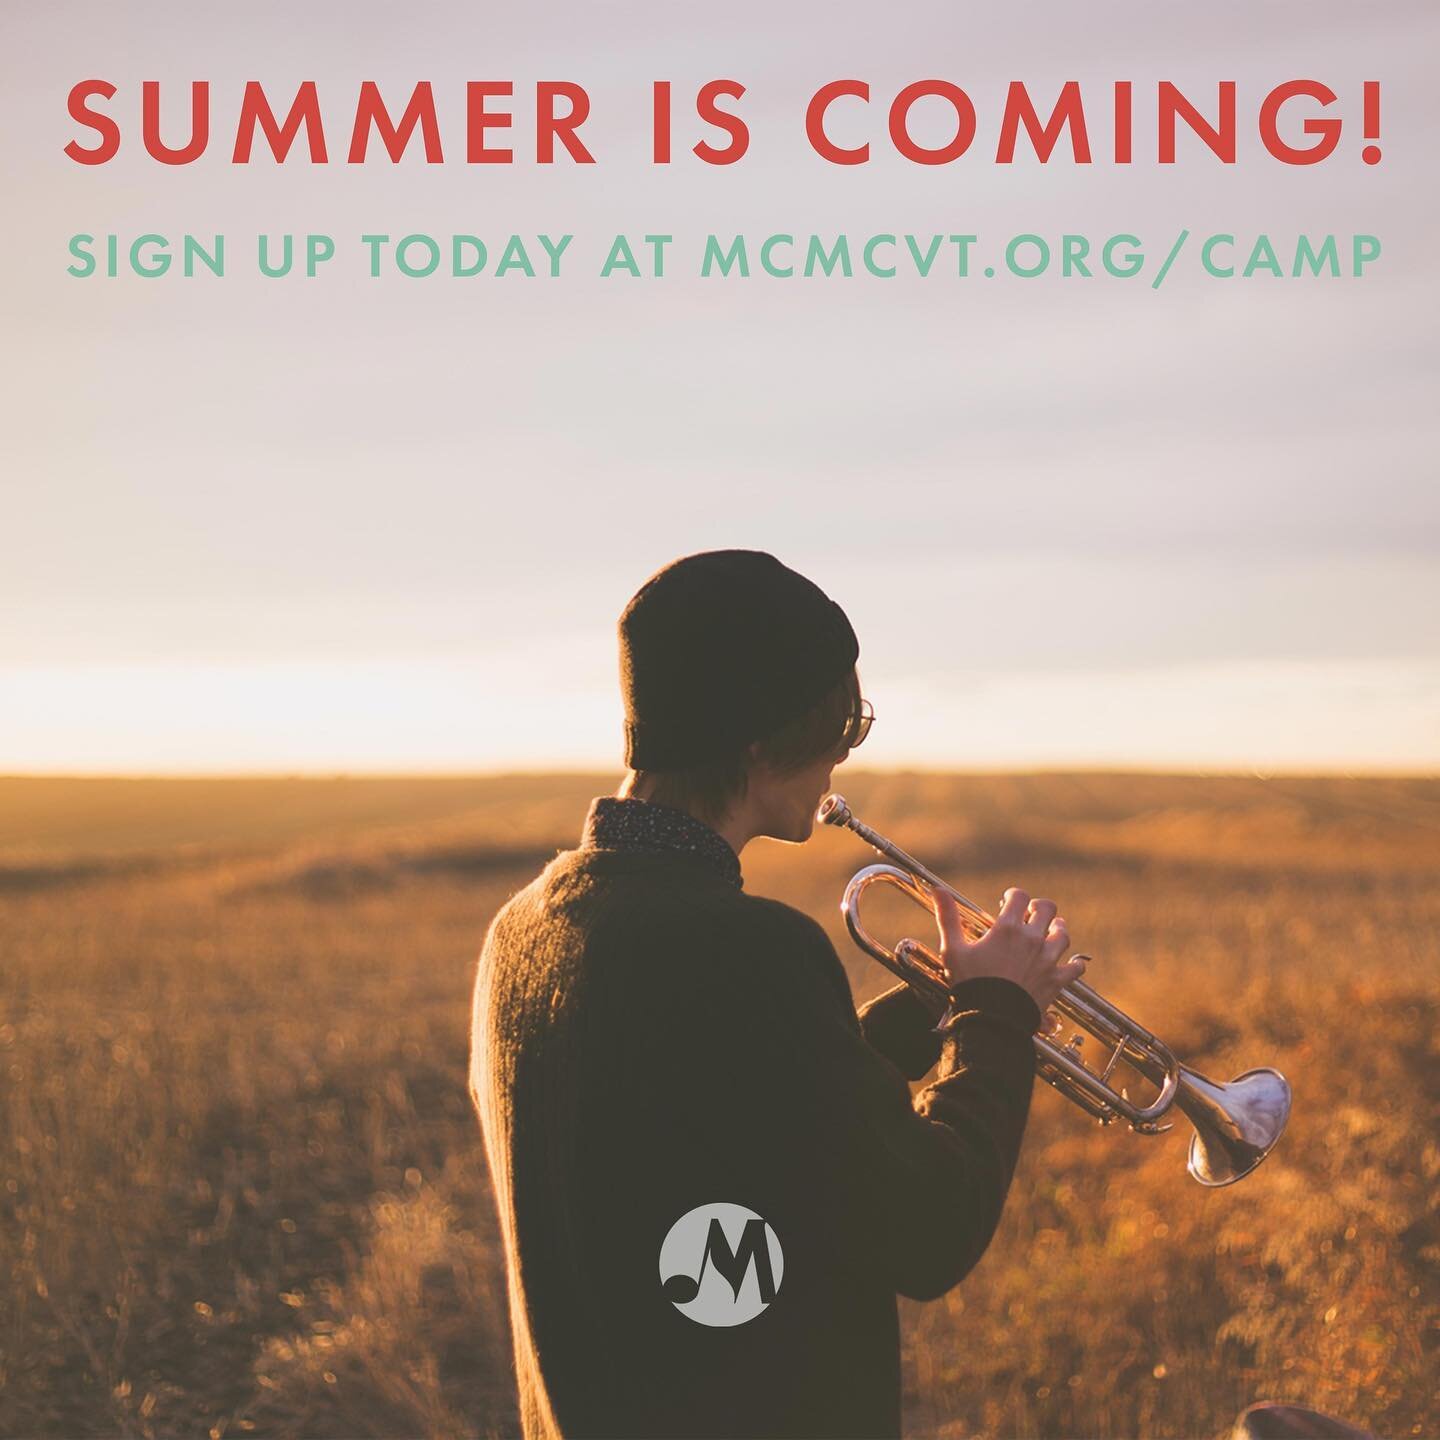 ⚡️Adagio, Musical Arts, House of Pop, Steel drum, and more...

⚡️Spend your summer expressing your creativity through music and register for any of our camps today! 

⚡️Head to www.mcmcvt.org/camp for a full list of this summer&rsquo;s camps. 

🌞☀️?